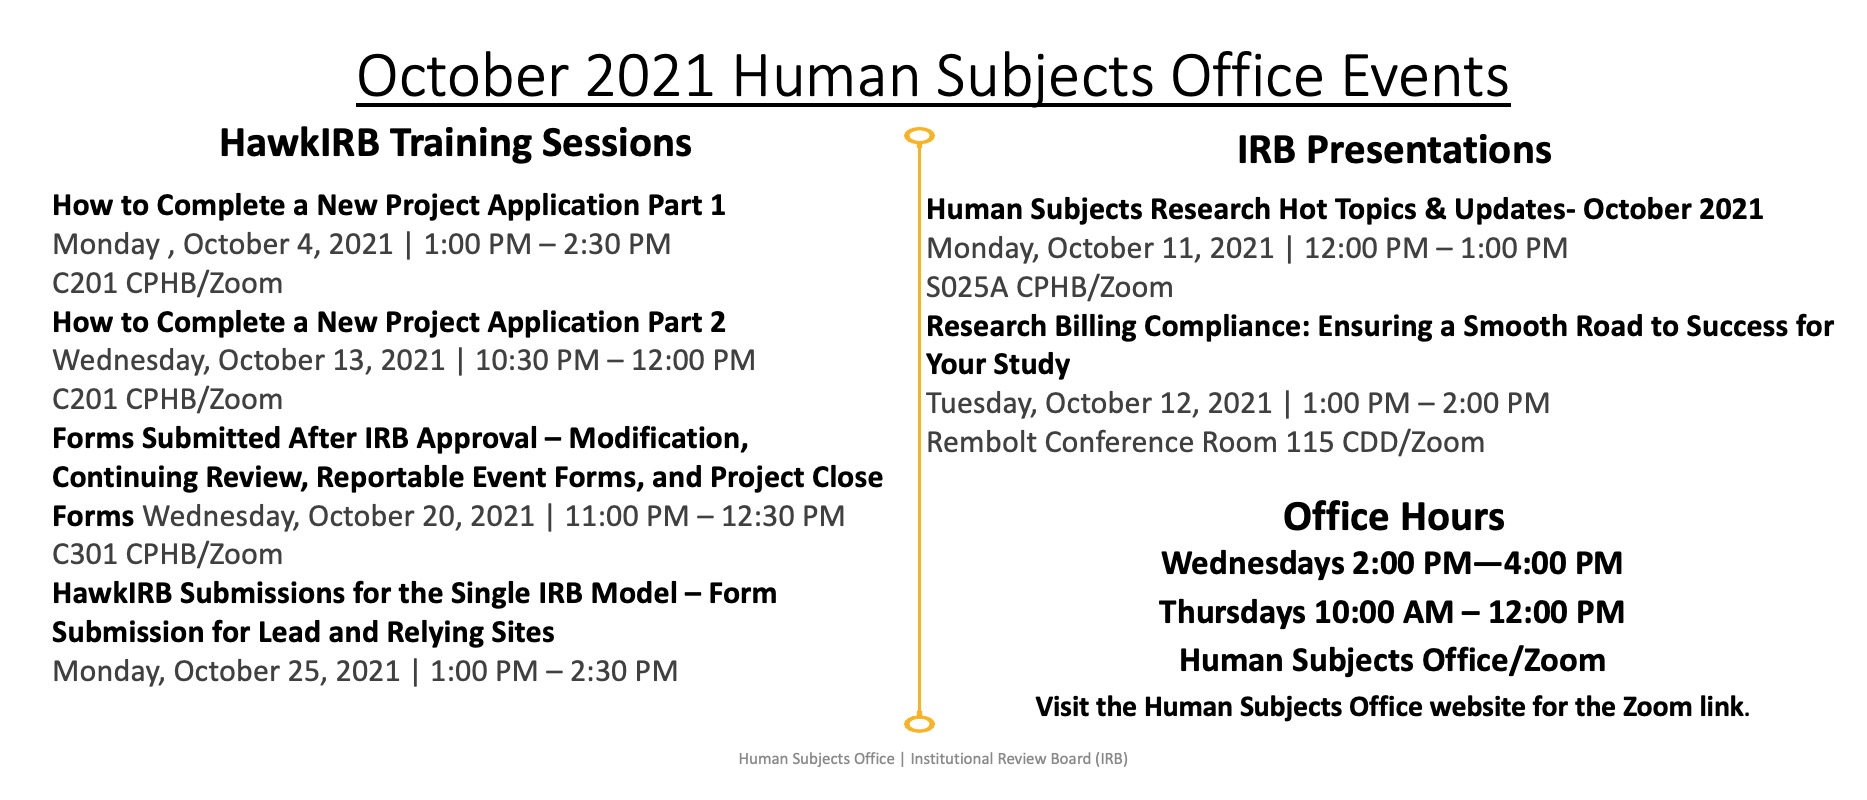 October 2021 Human Subjects Office Events